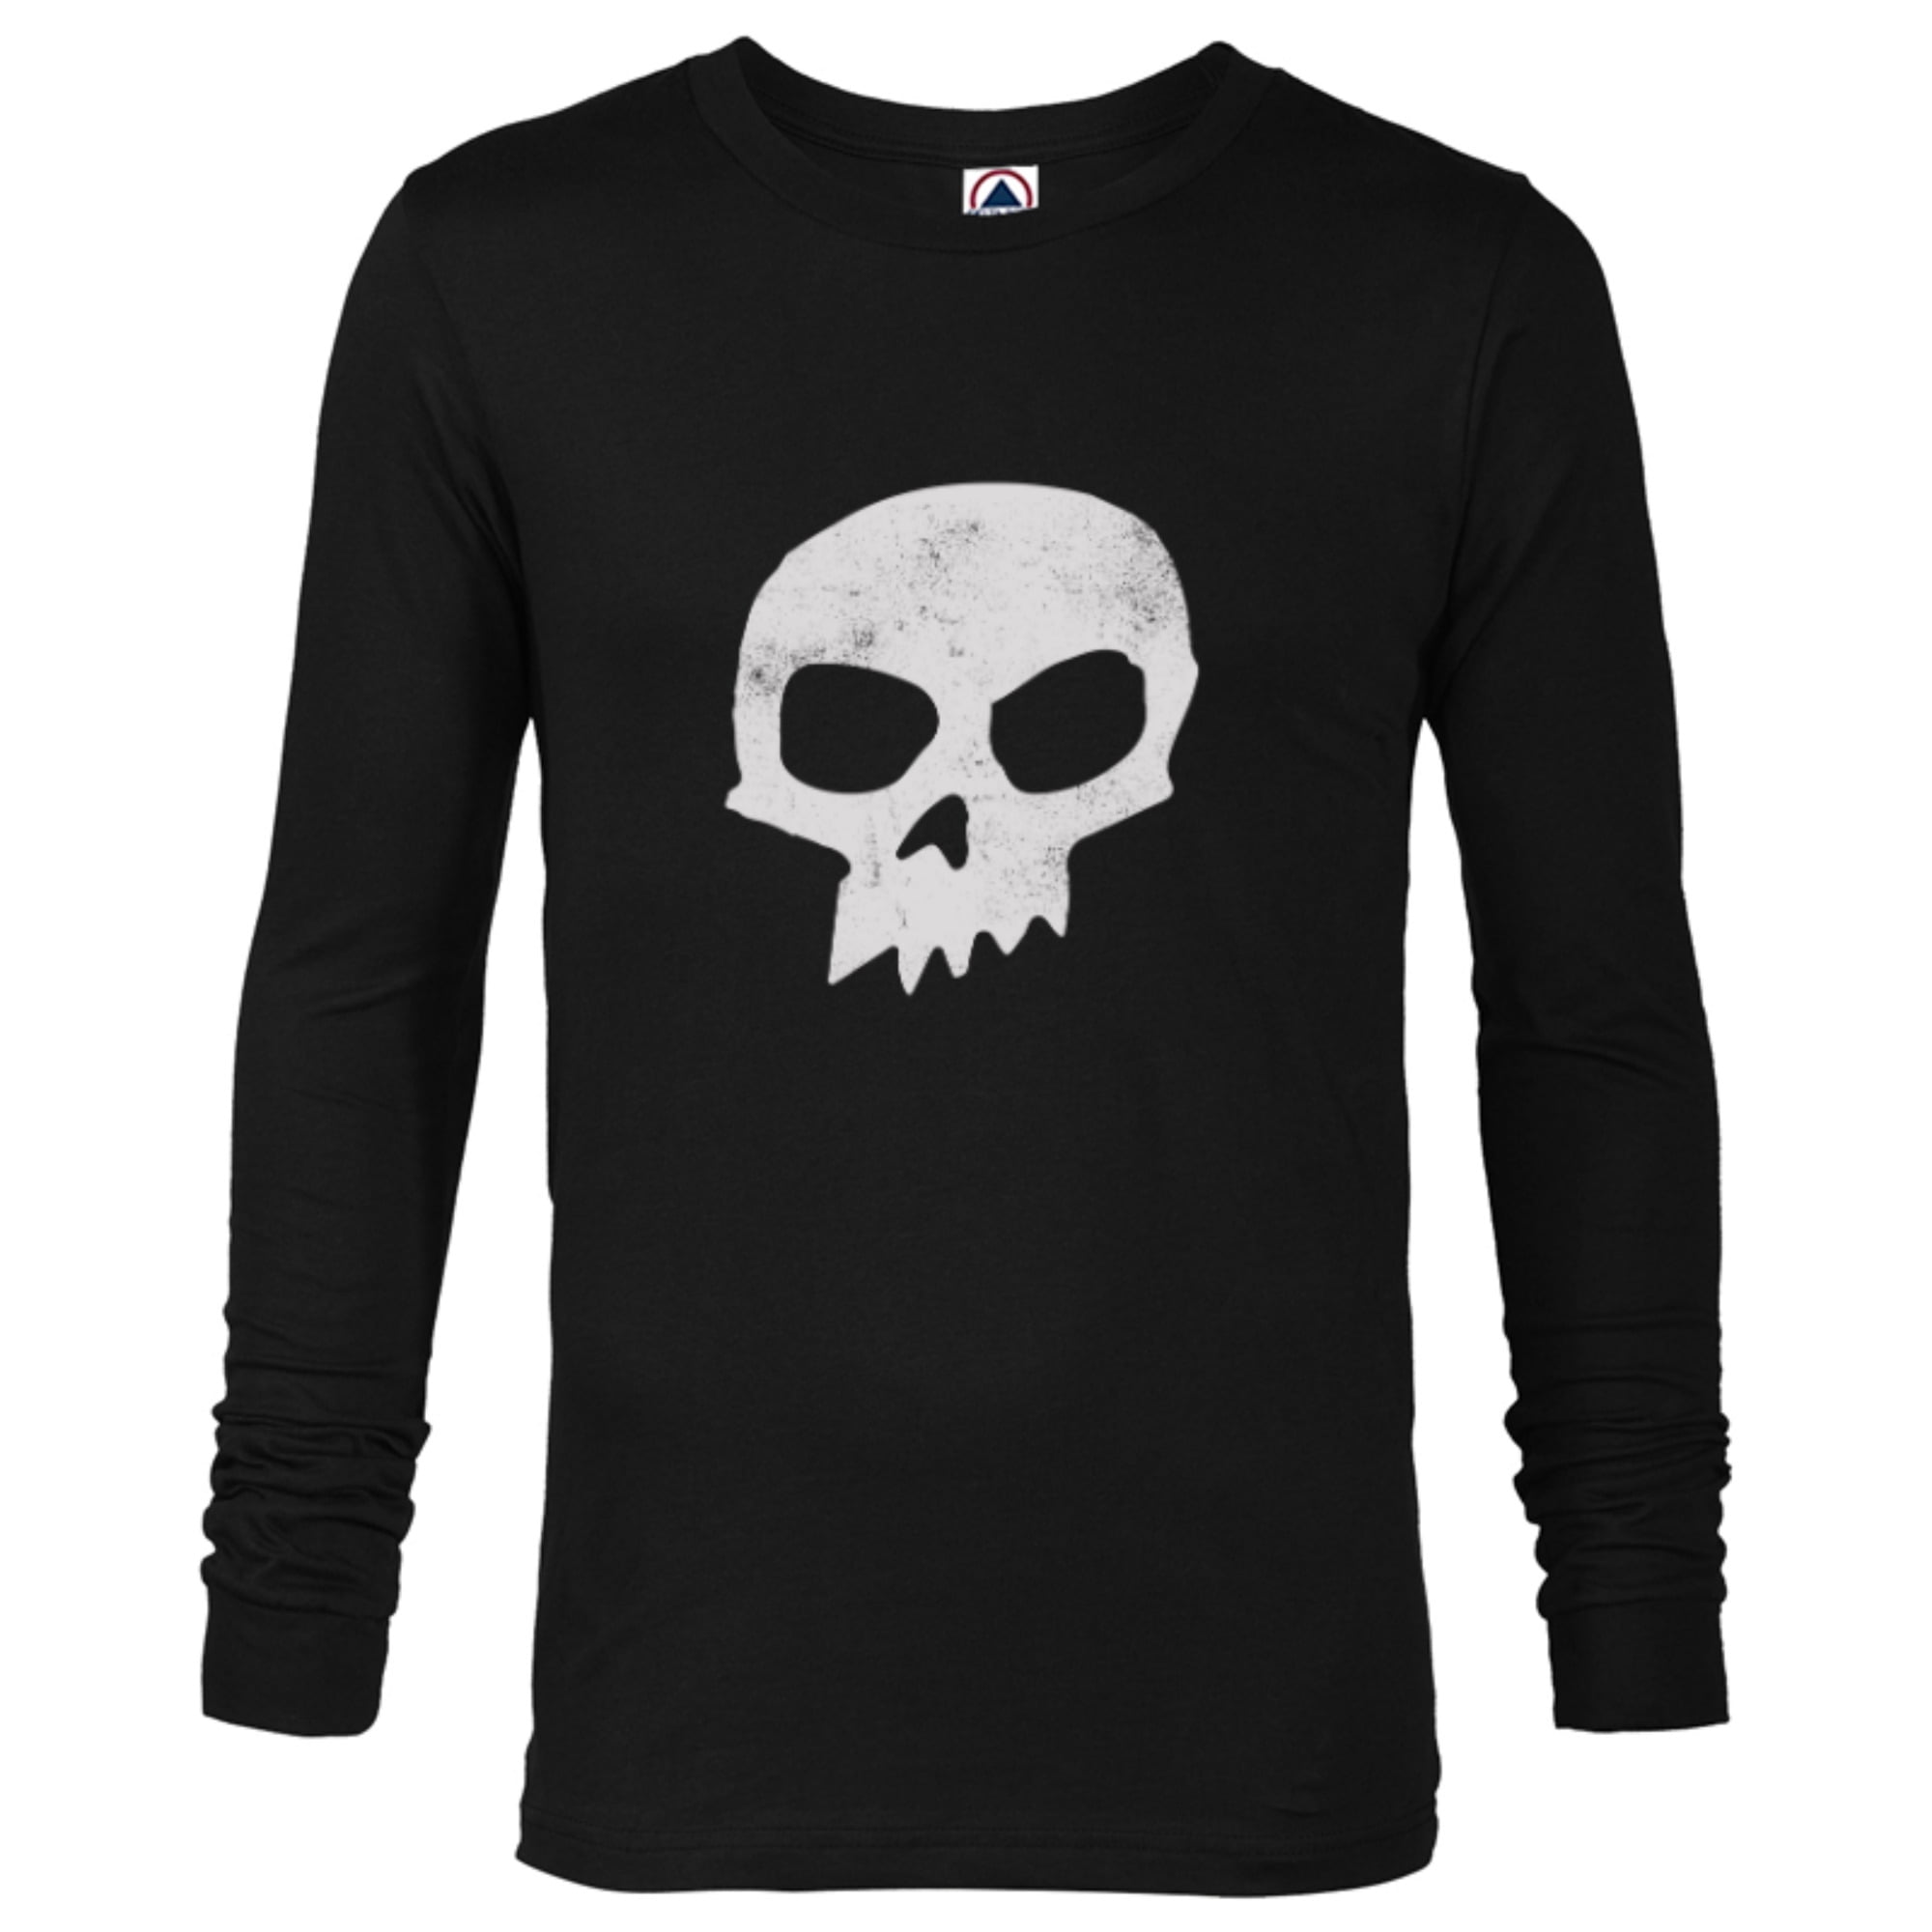 Disney and Pixar's Toy Story Sid Skull Black - Long Sleeve T-Shirt for ...